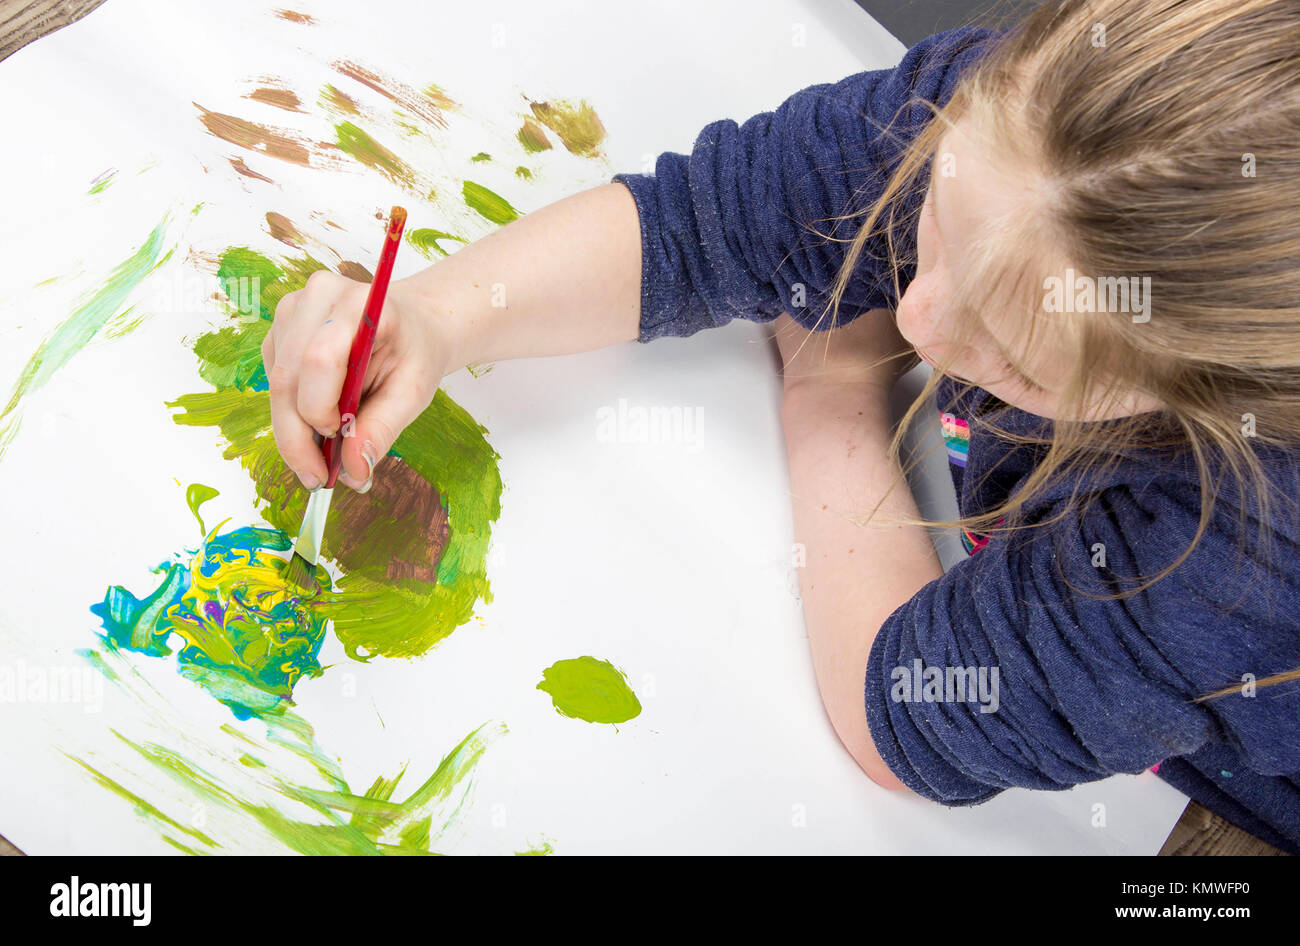 young child playing with paint brush in splattered paint on a white background Stock Photo